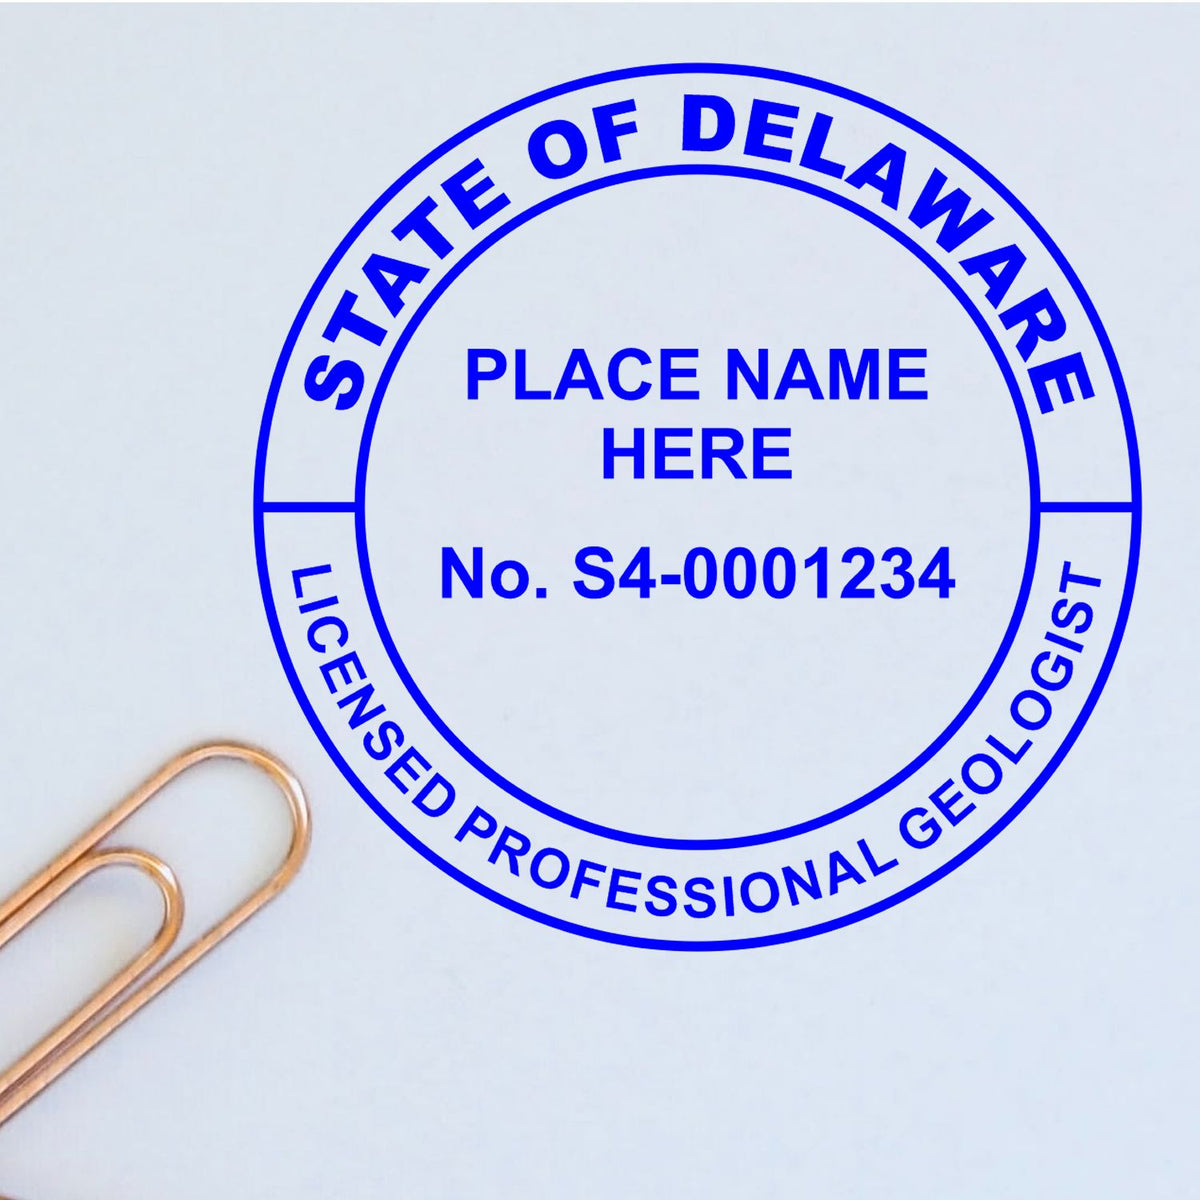 A lifestyle photo showing a stamped image of the Digital Delaware Geologist Stamp, Electronic Seal for Delaware Geologist on a piece of paper